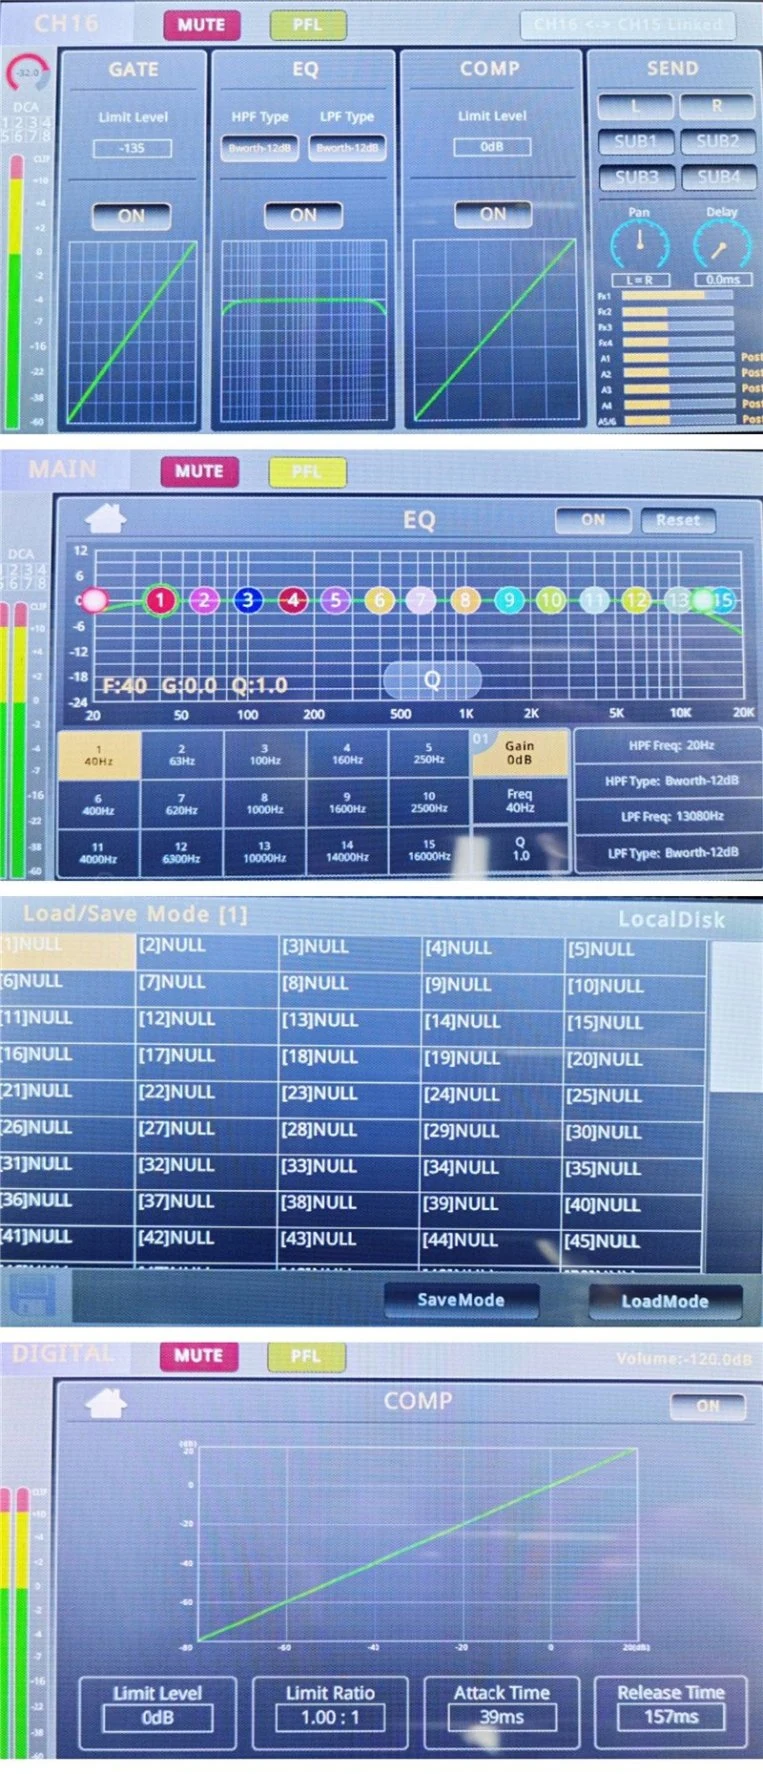 China Quality Digital mixing Factory Wholesale Price of Digital Mixer,Digital Mixer console